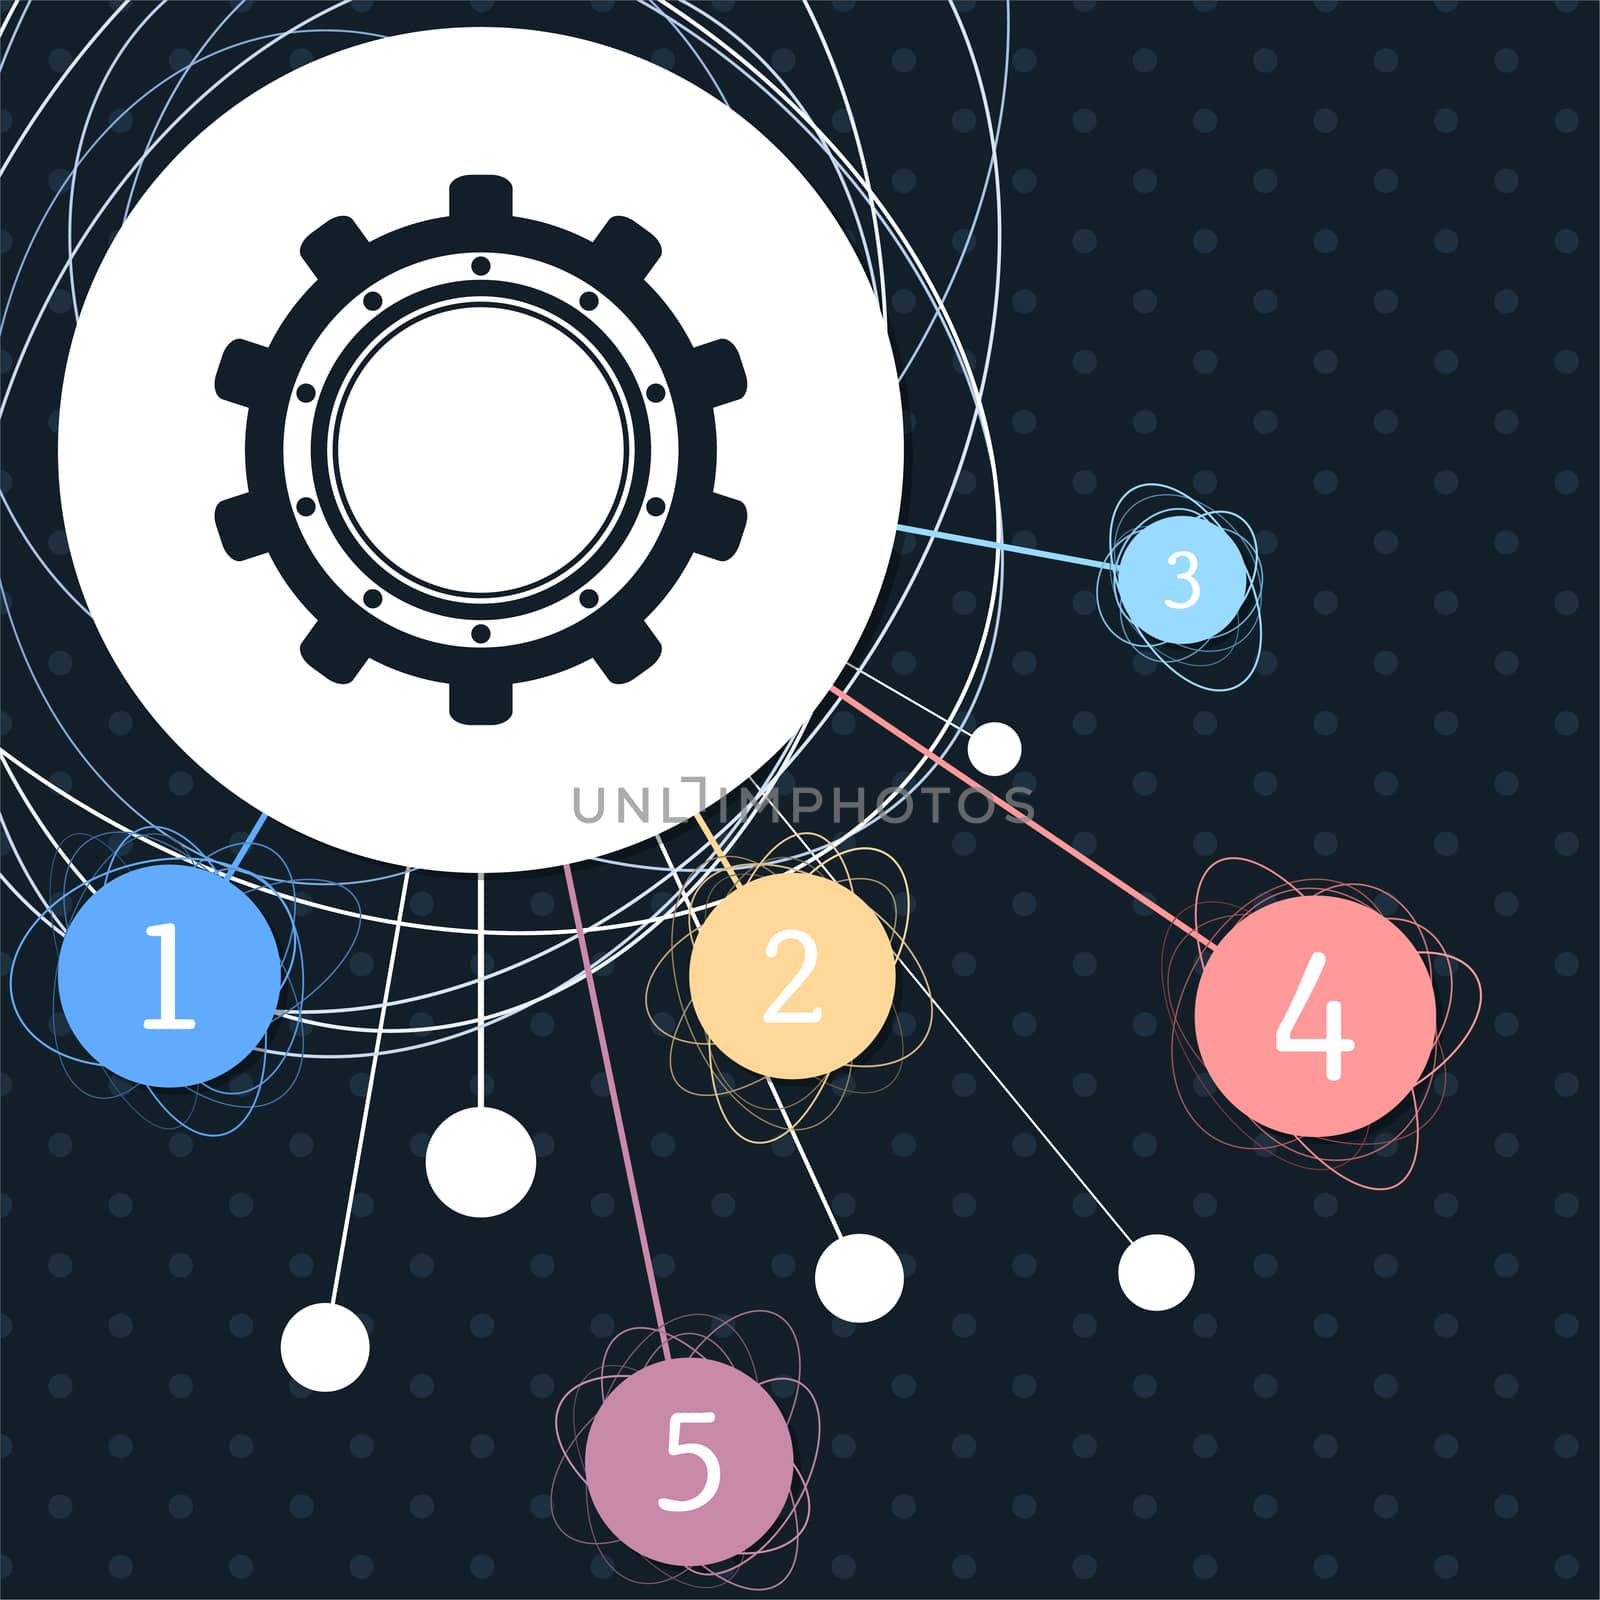 Gear, cog icon with the background to the point and infographic style.  by Adamchuk